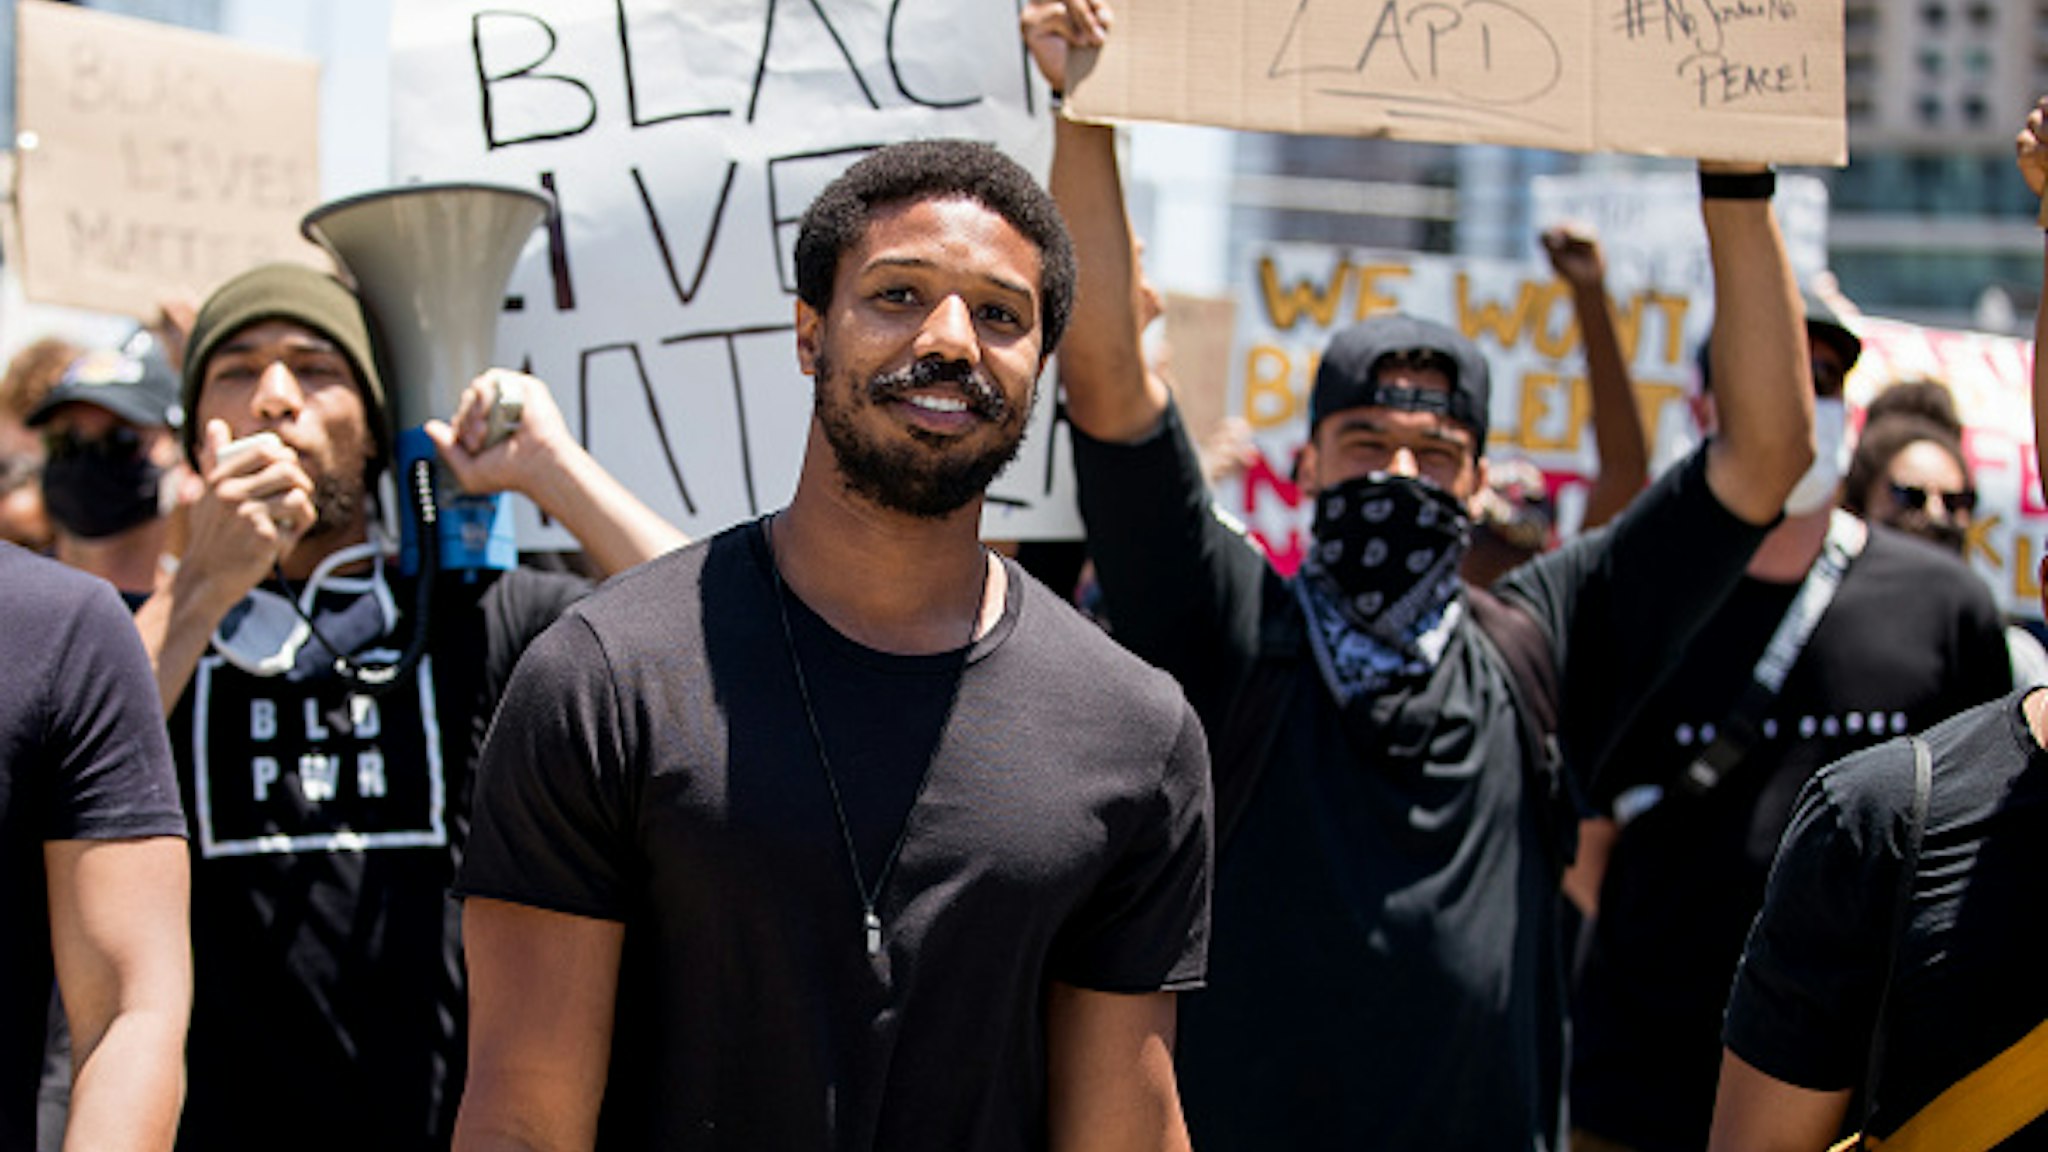 BEVERLY HILLS, CALIFORNIA - JUNE 06: Michael B. Jordan participates in the Hollywood talent agencies march to support Black Lives Matter protests on June 06, 2020 in Beverly Hills, California.